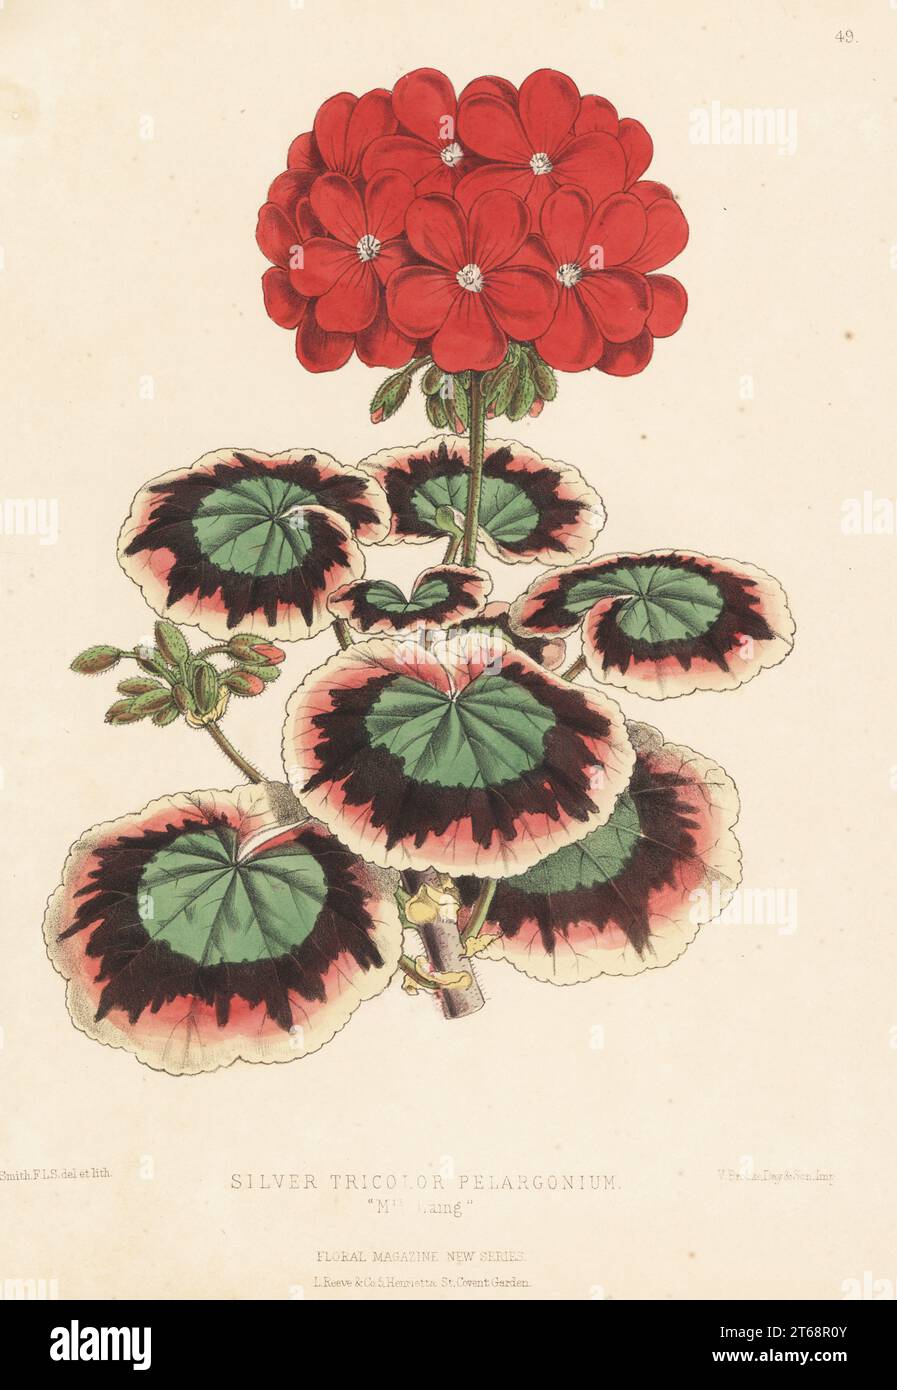 Silver tricolor pelargonium, Mrs Laing. A prize-winning hybrid of this popular geranium. Handcolored botanical illustration drawn and lithographed by Worthington George Smith from Henry Honywood Dombrain's Floral Magazine, New Series, Volume 2, L. Reeve, London, 1873. Lithograph printed by Vincent Brooks, Day & Son. Stock Photo